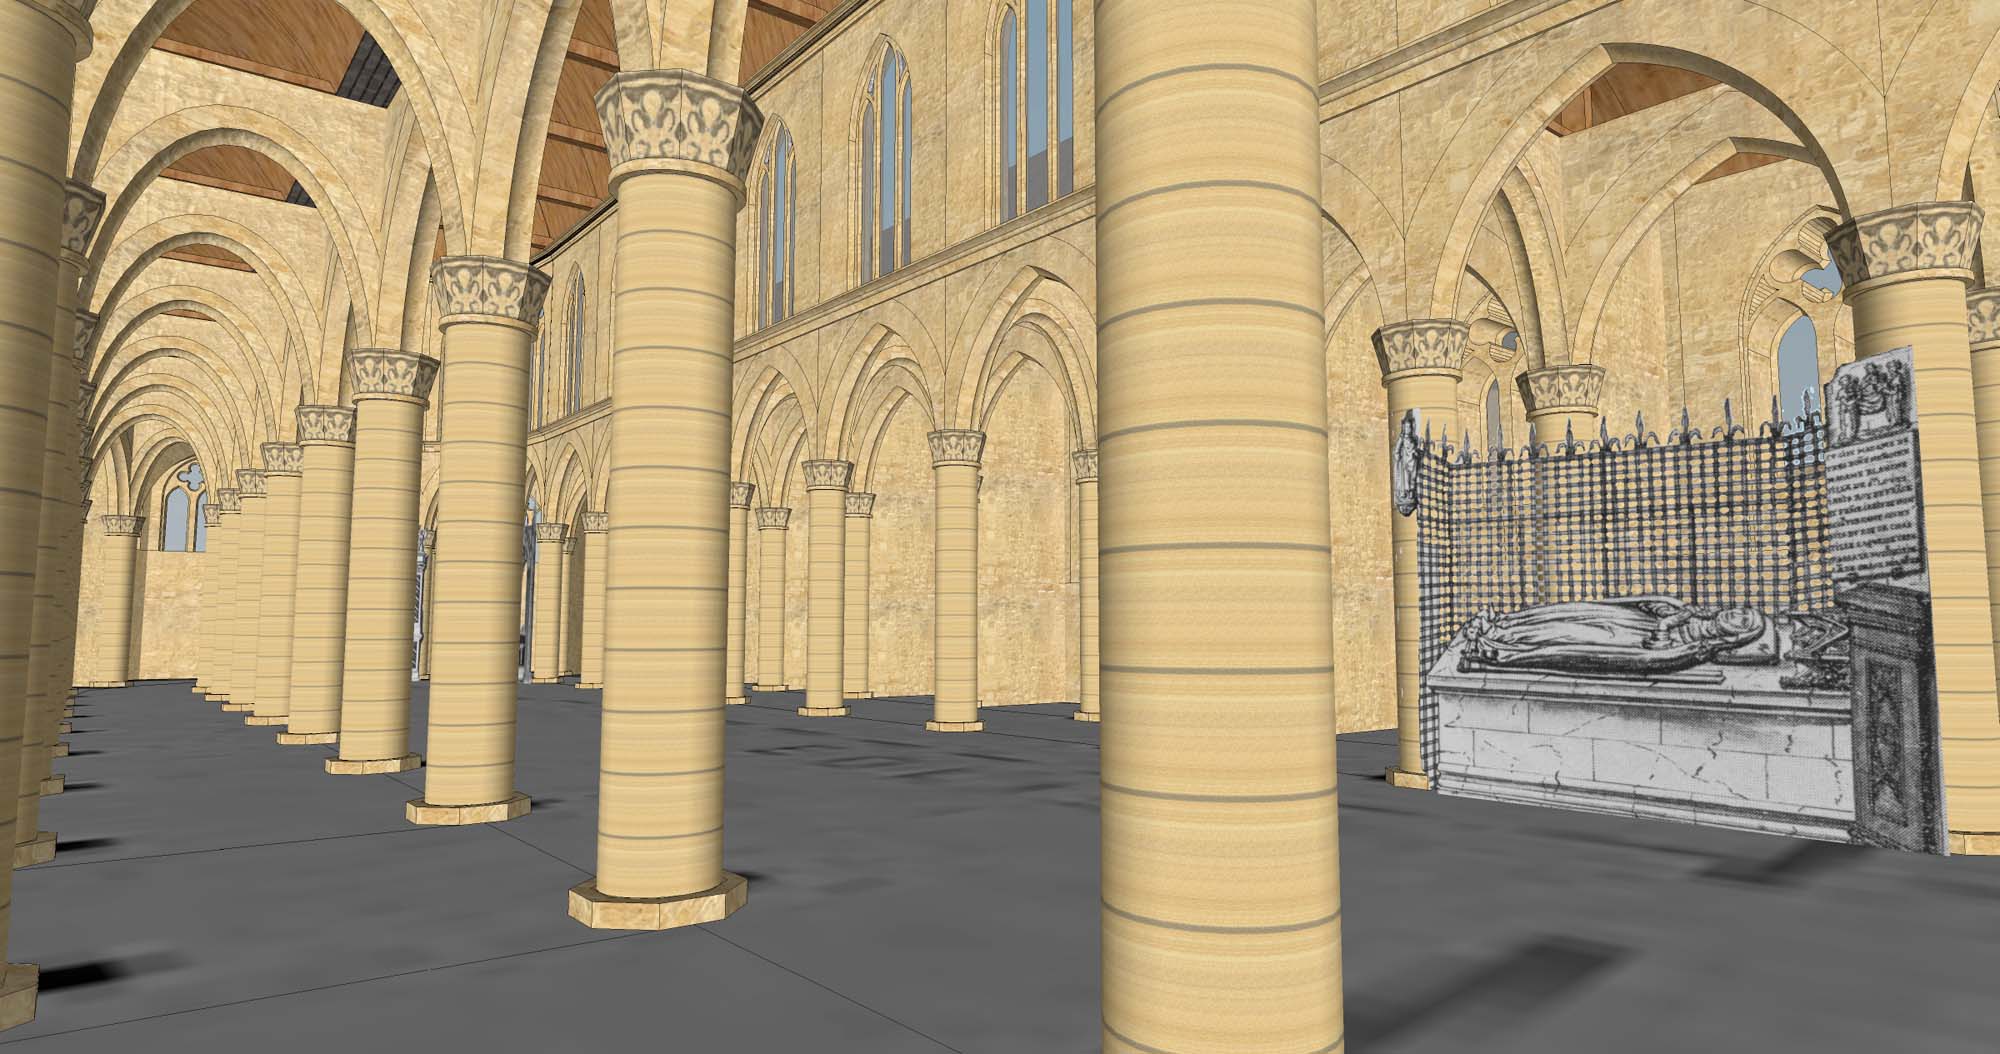 Reconstruction of the interior of Sainte-Marie-Madeleine looking west down the nave from the south aisle, including the Gaignières drawing of Blanche of France (Paris, BnF, Département des manuscrits, Clairambault 632, fol. 143) placed in its original location. © Michael T. Davis